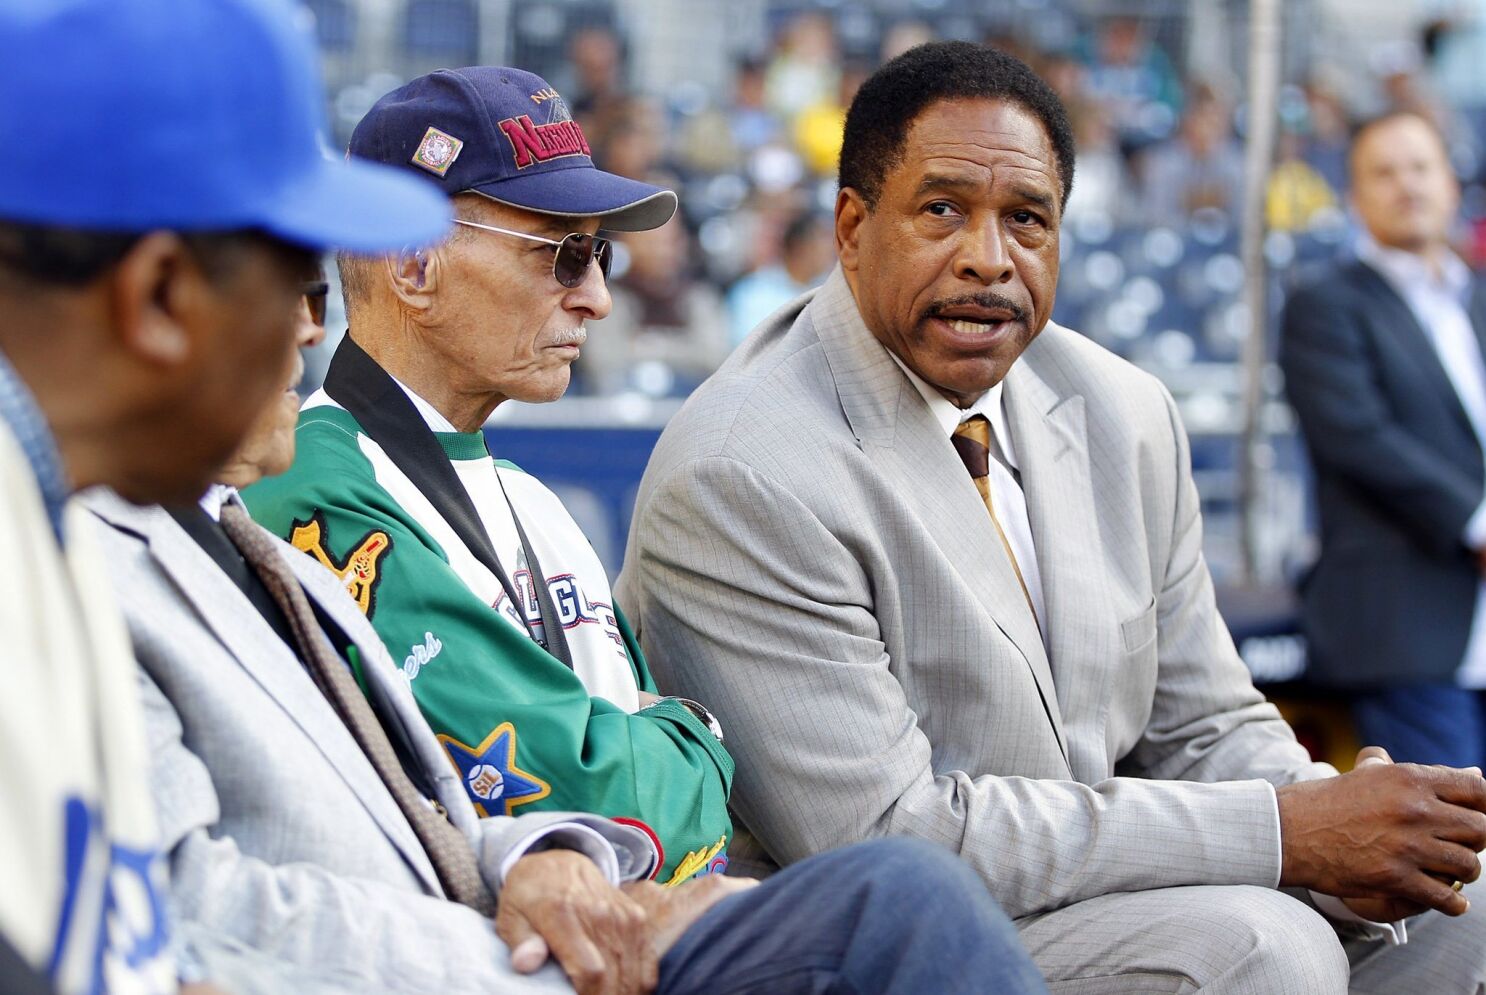 Former baseball professional Dave Winfield and his wife Tonya